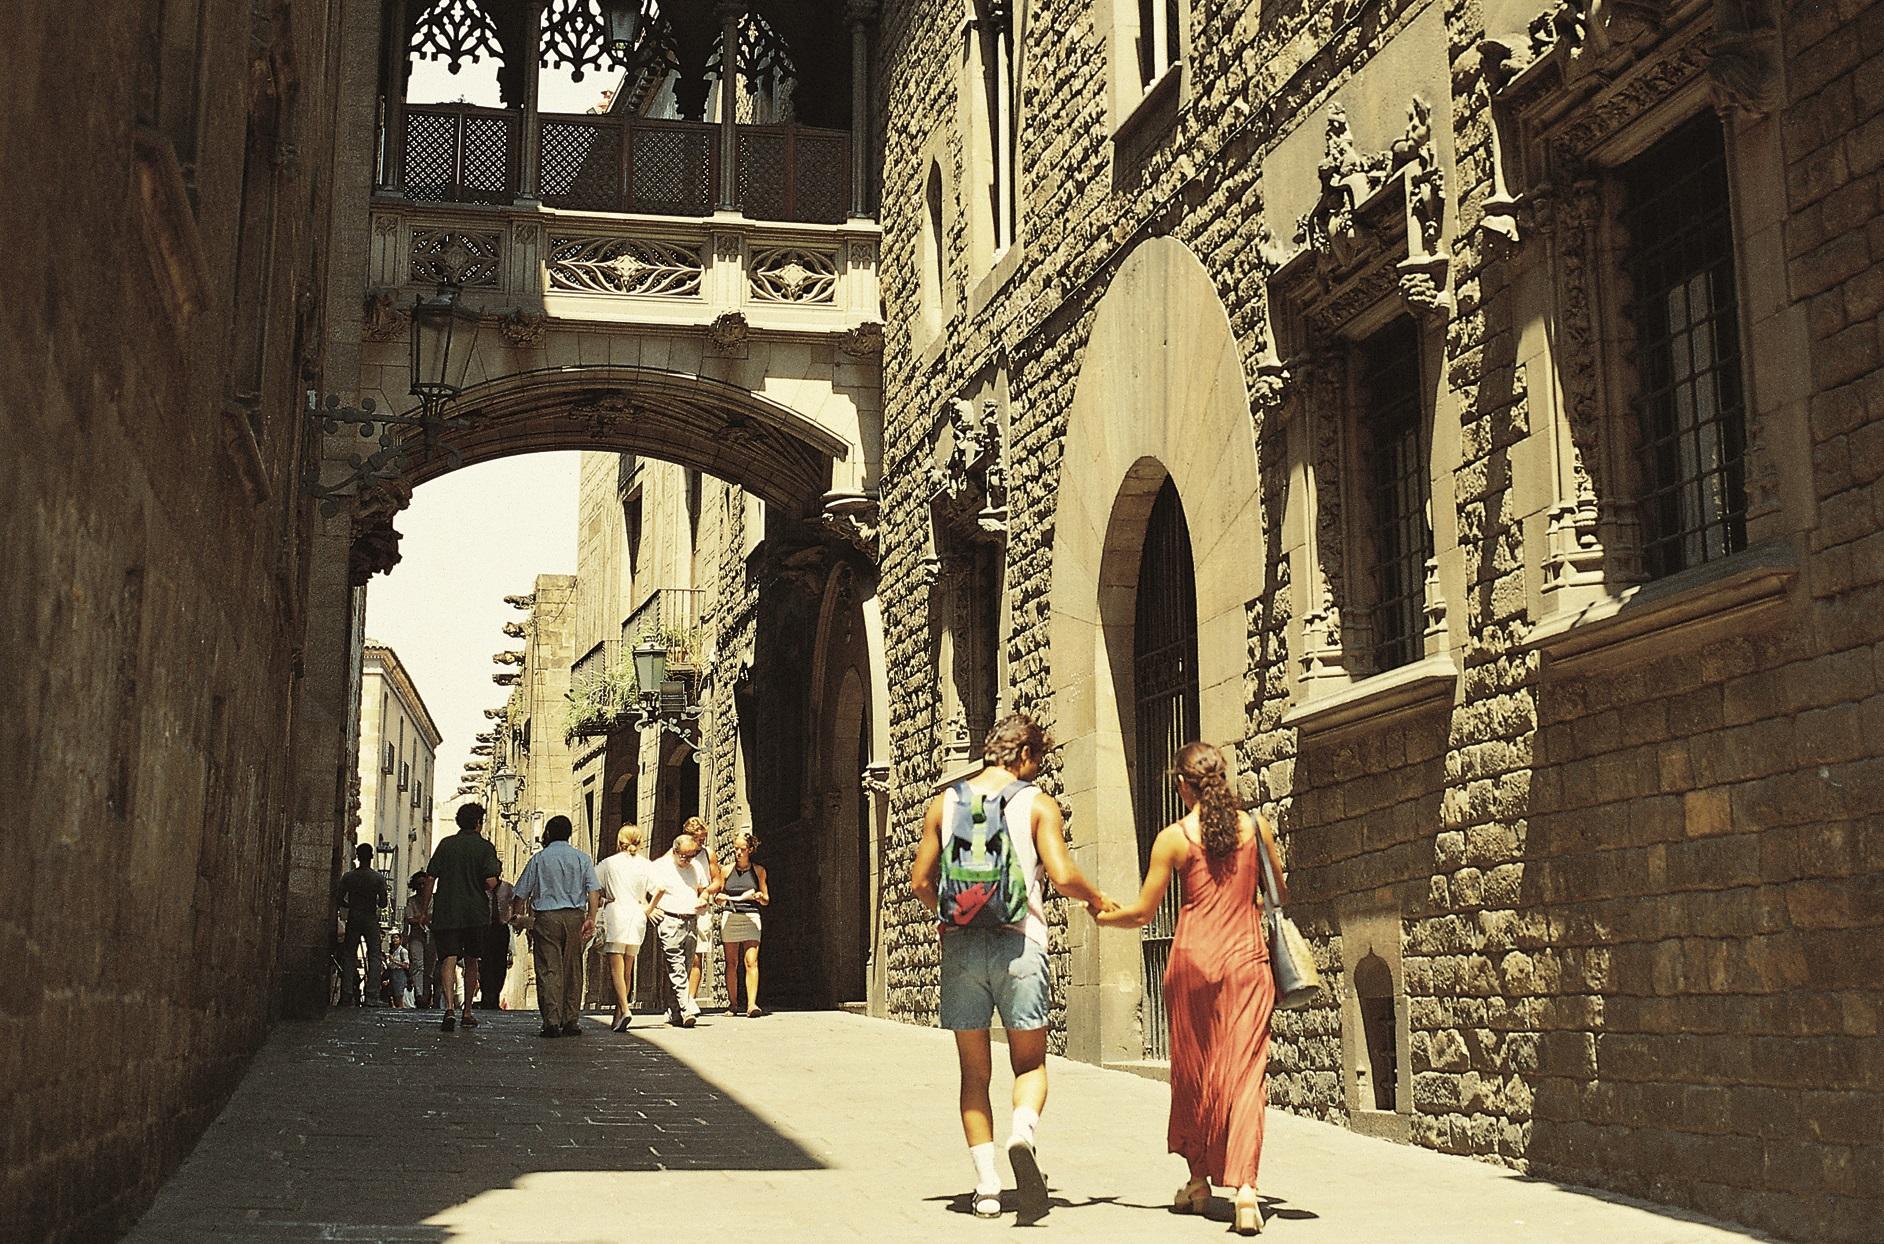 Discover Barcelona with a free World tour | Aviation Week Network